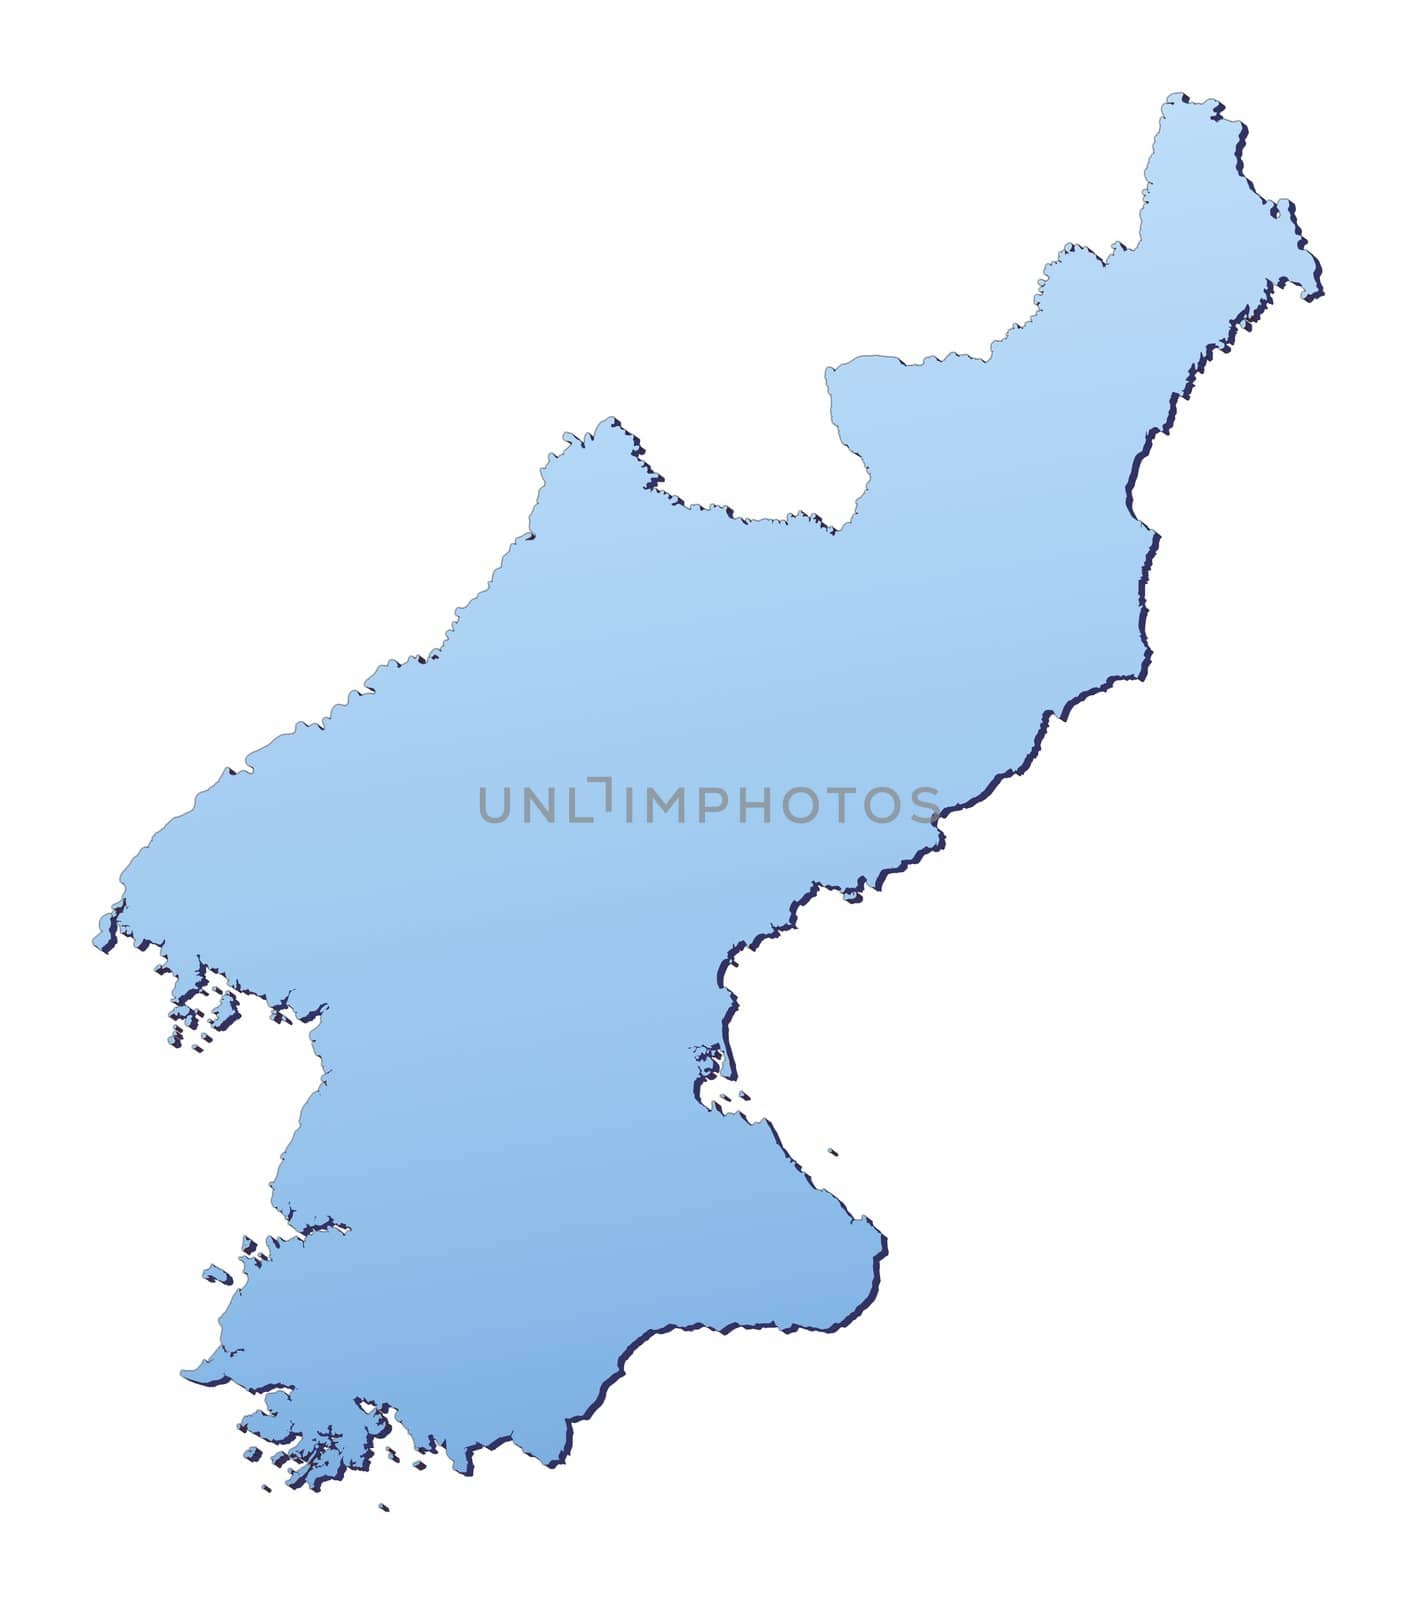 North Korea map filled with light blue gradient. High resolution. Mercator projection.